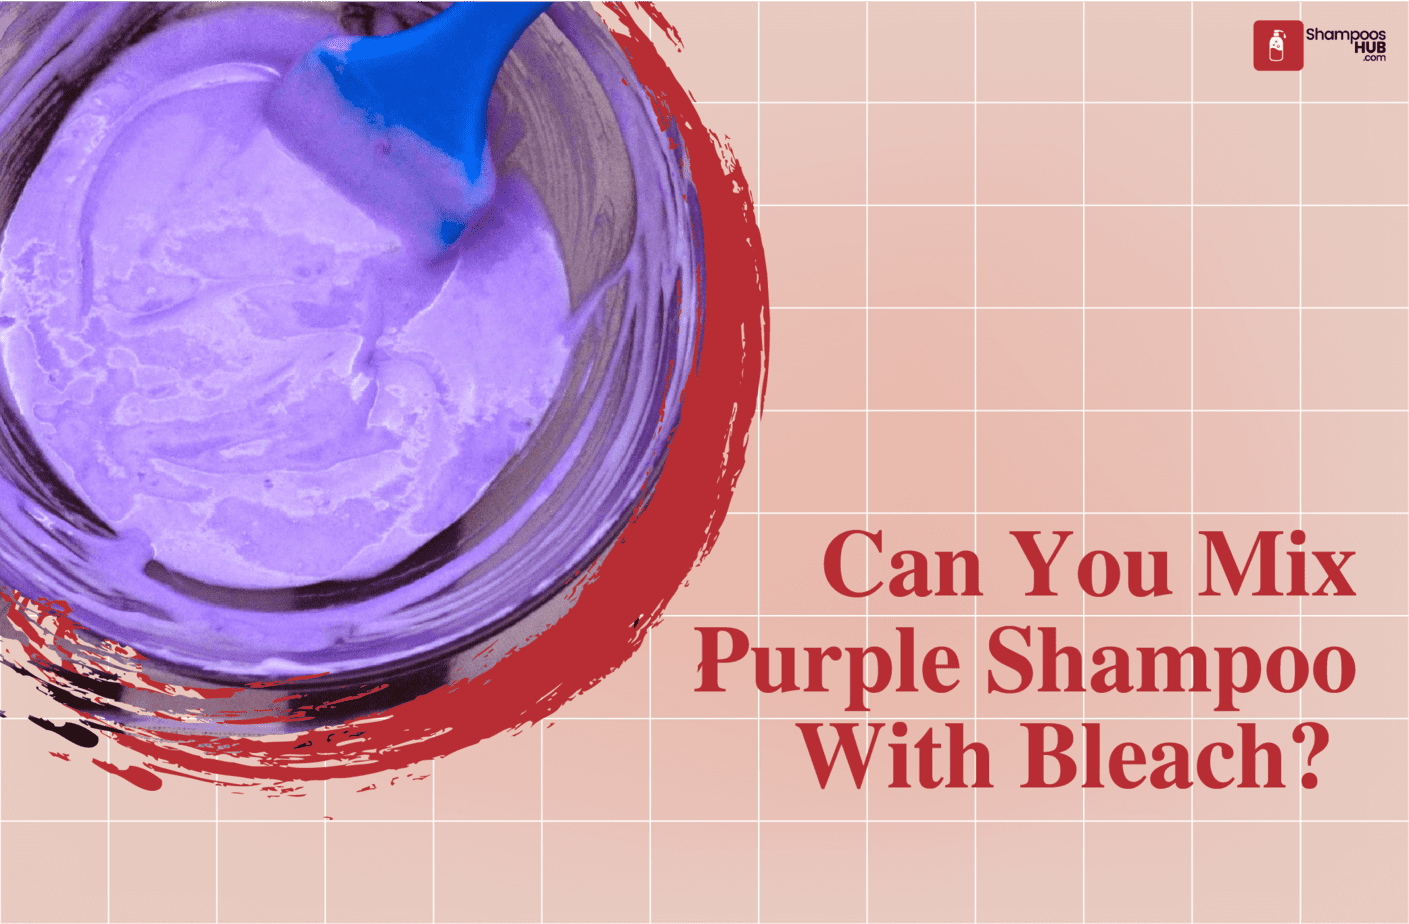 Can You Mix Purple Shampoo With Bleach?